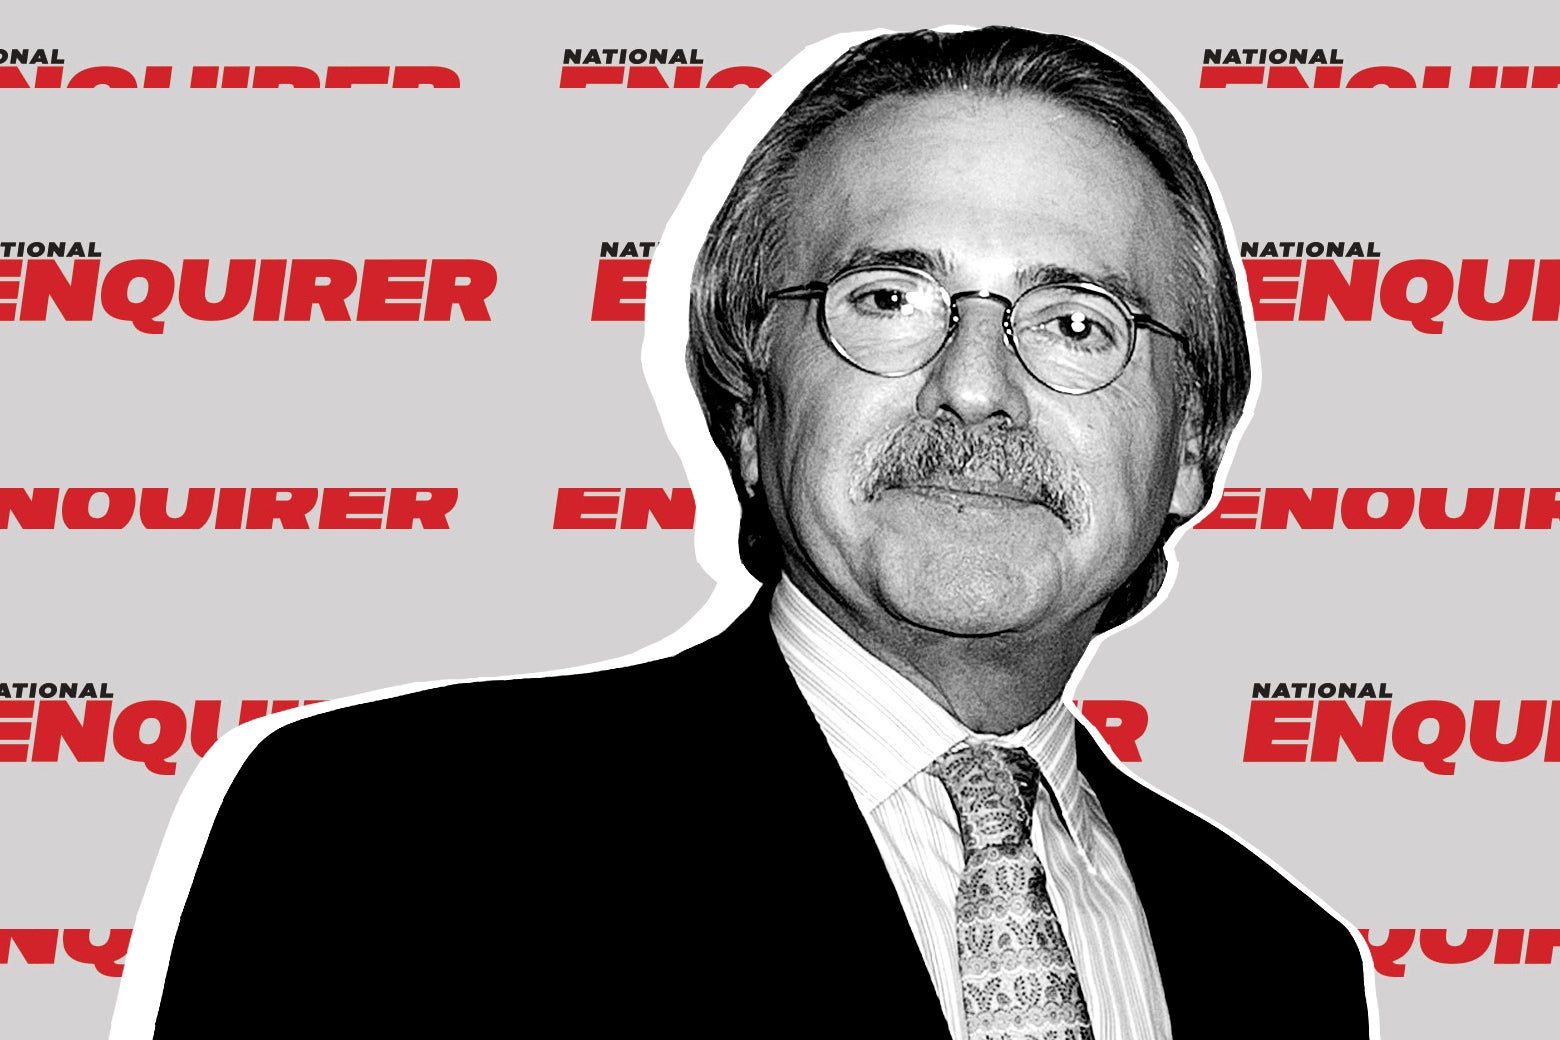 David Pecker in front of a repeating pattern of National Enquirer logos.